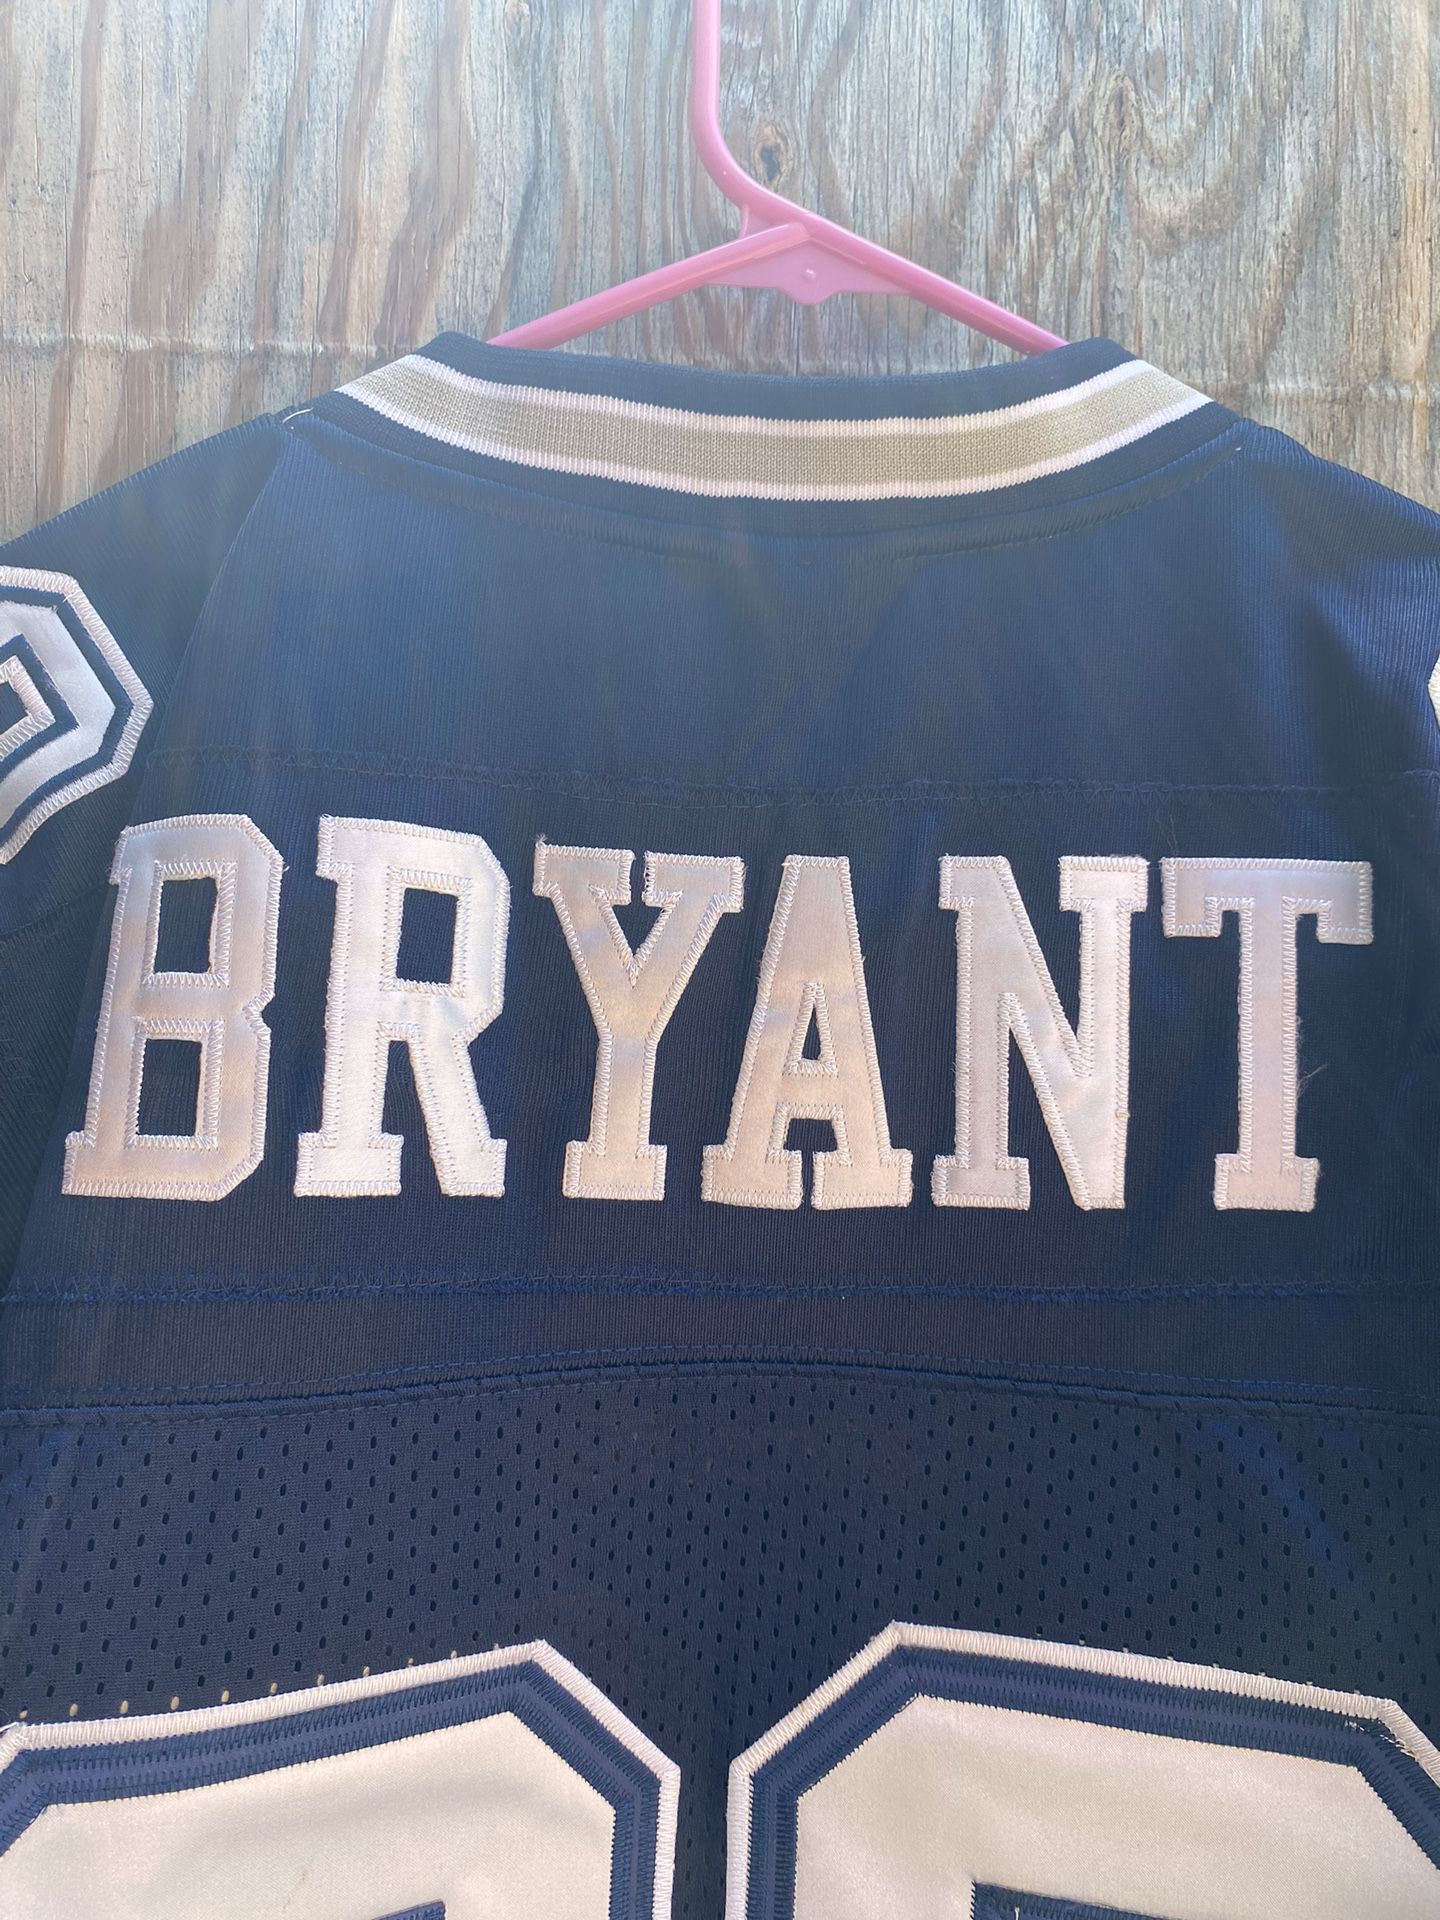 JERSEY Dez Bryant Dallas Cowboys Green Camo Salute to Service Jersey for  Sale in Mesa, AZ - OfferUp